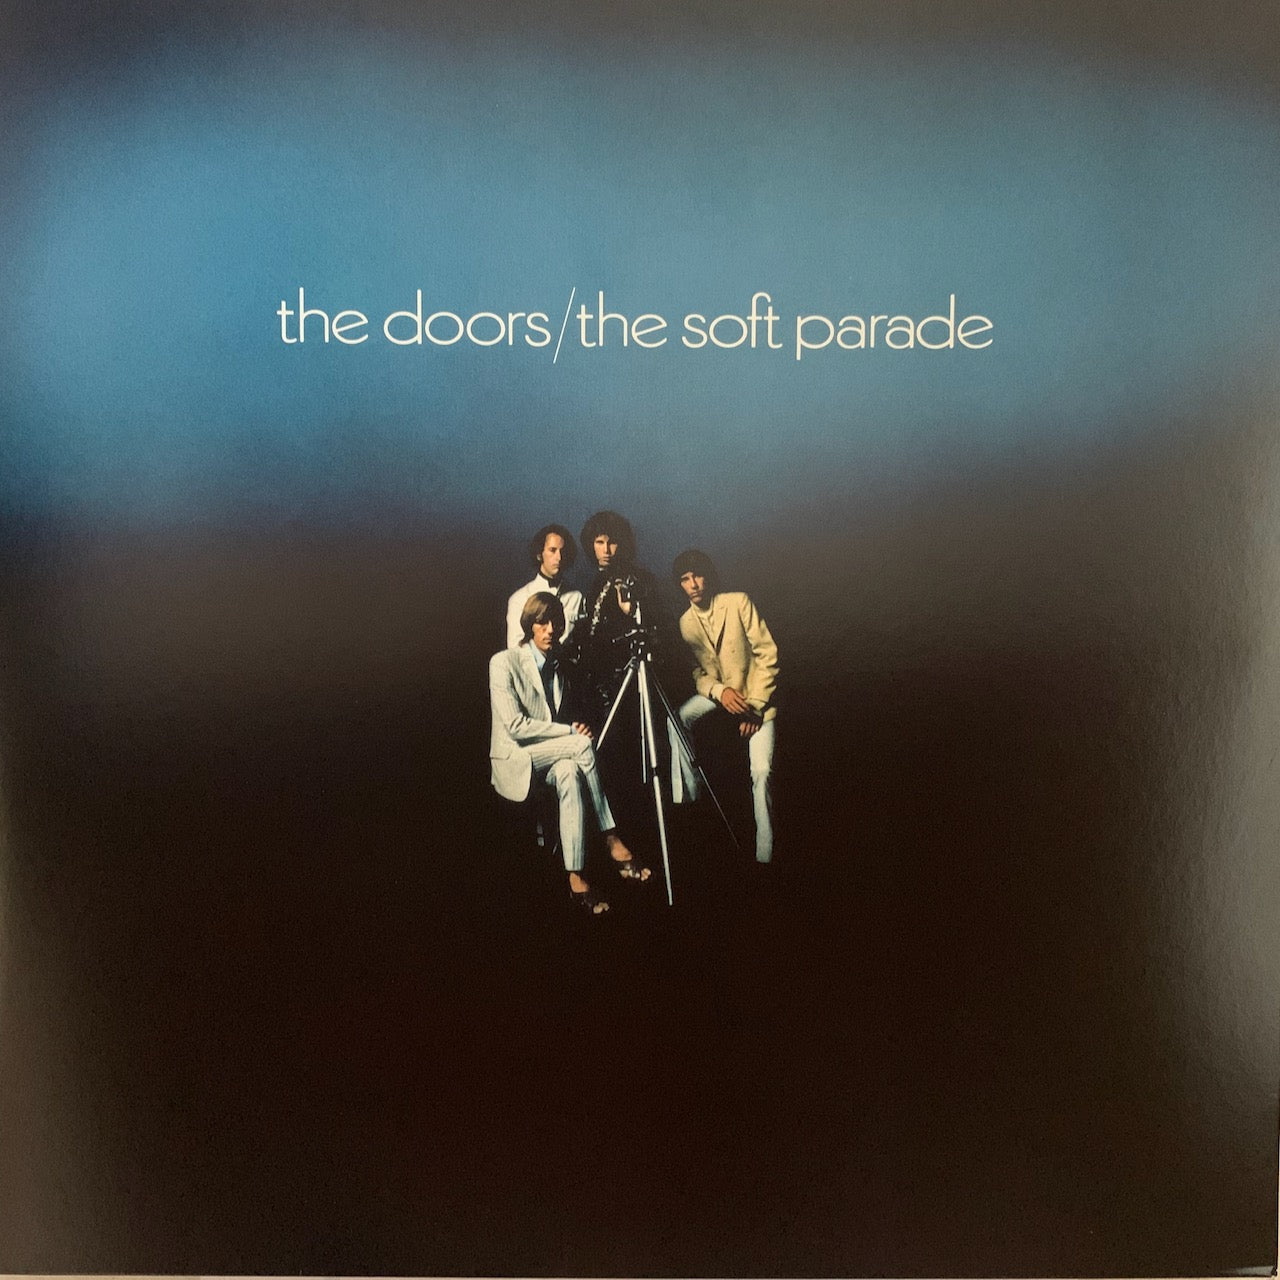 THE DOORS - THE SOFT PARADE    NM /NM  2020